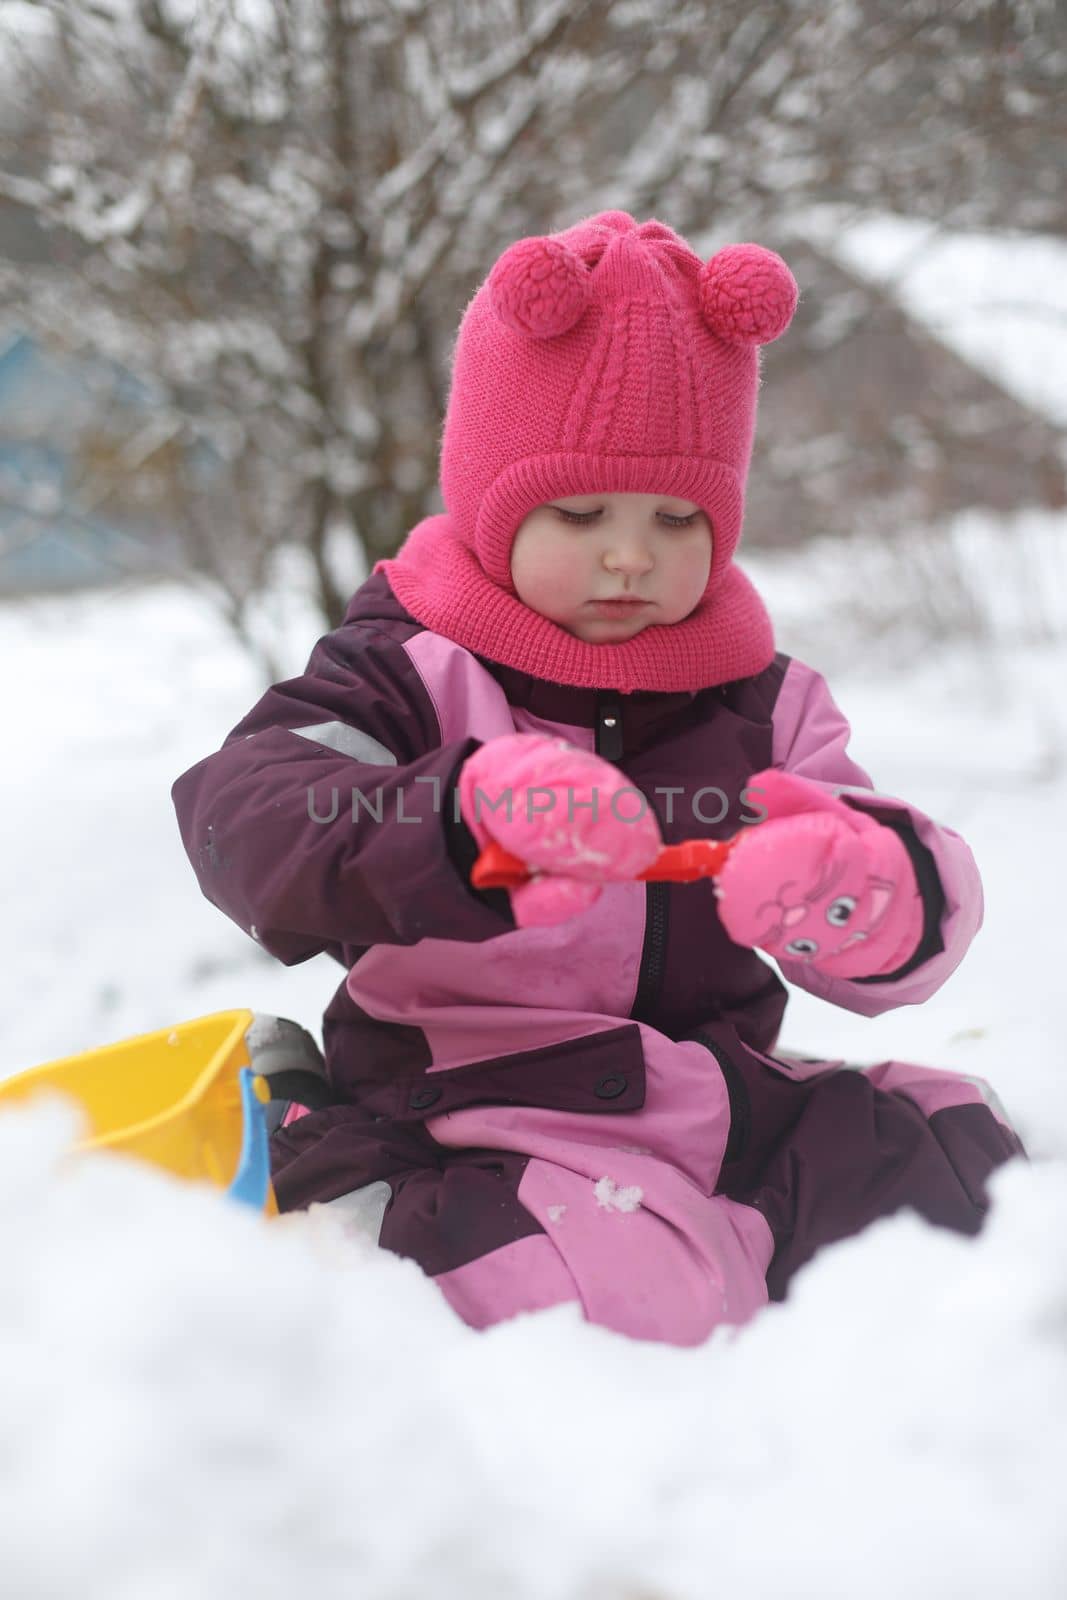 Adorable girl dig snow with shovel and pail on playground covered with snow. little girl playing in the snow.